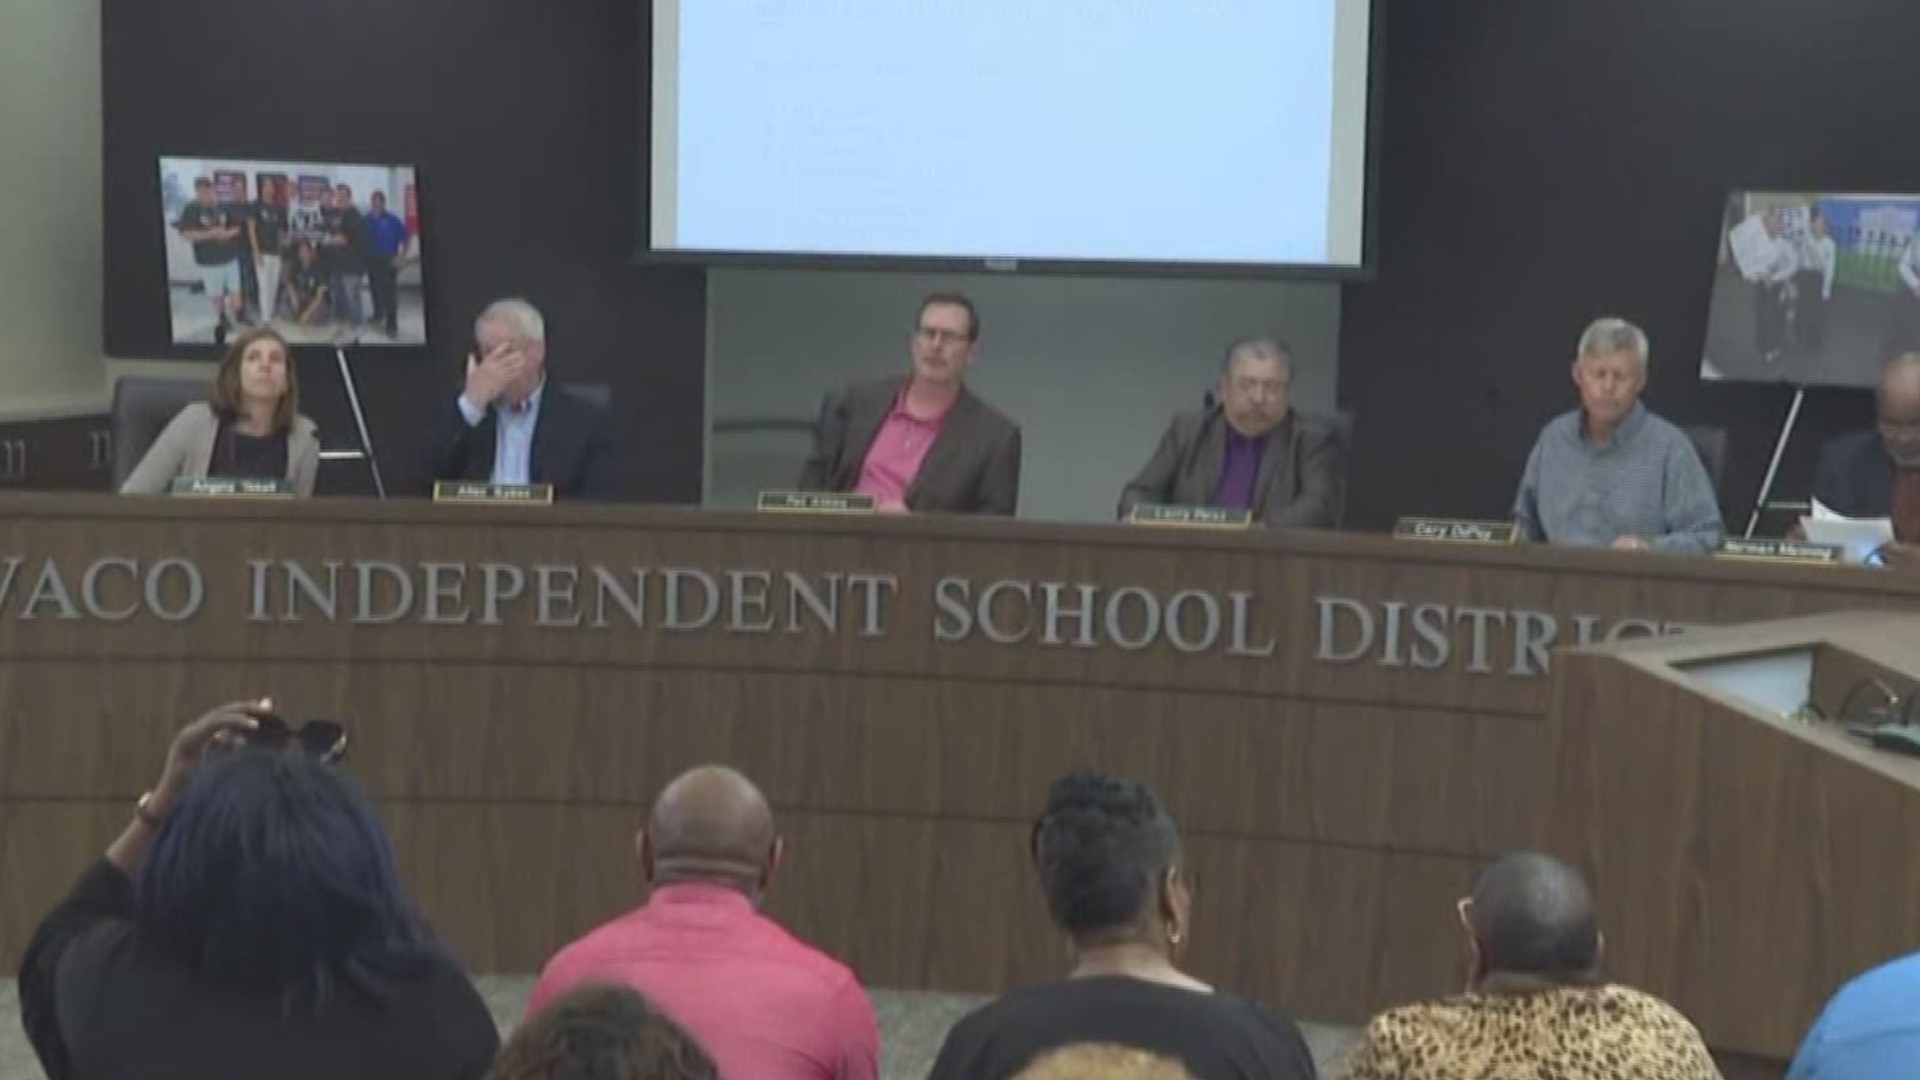 The Waco ISD Board of Trustees will meet in a closed session Monday evening to review applications for superintendent.